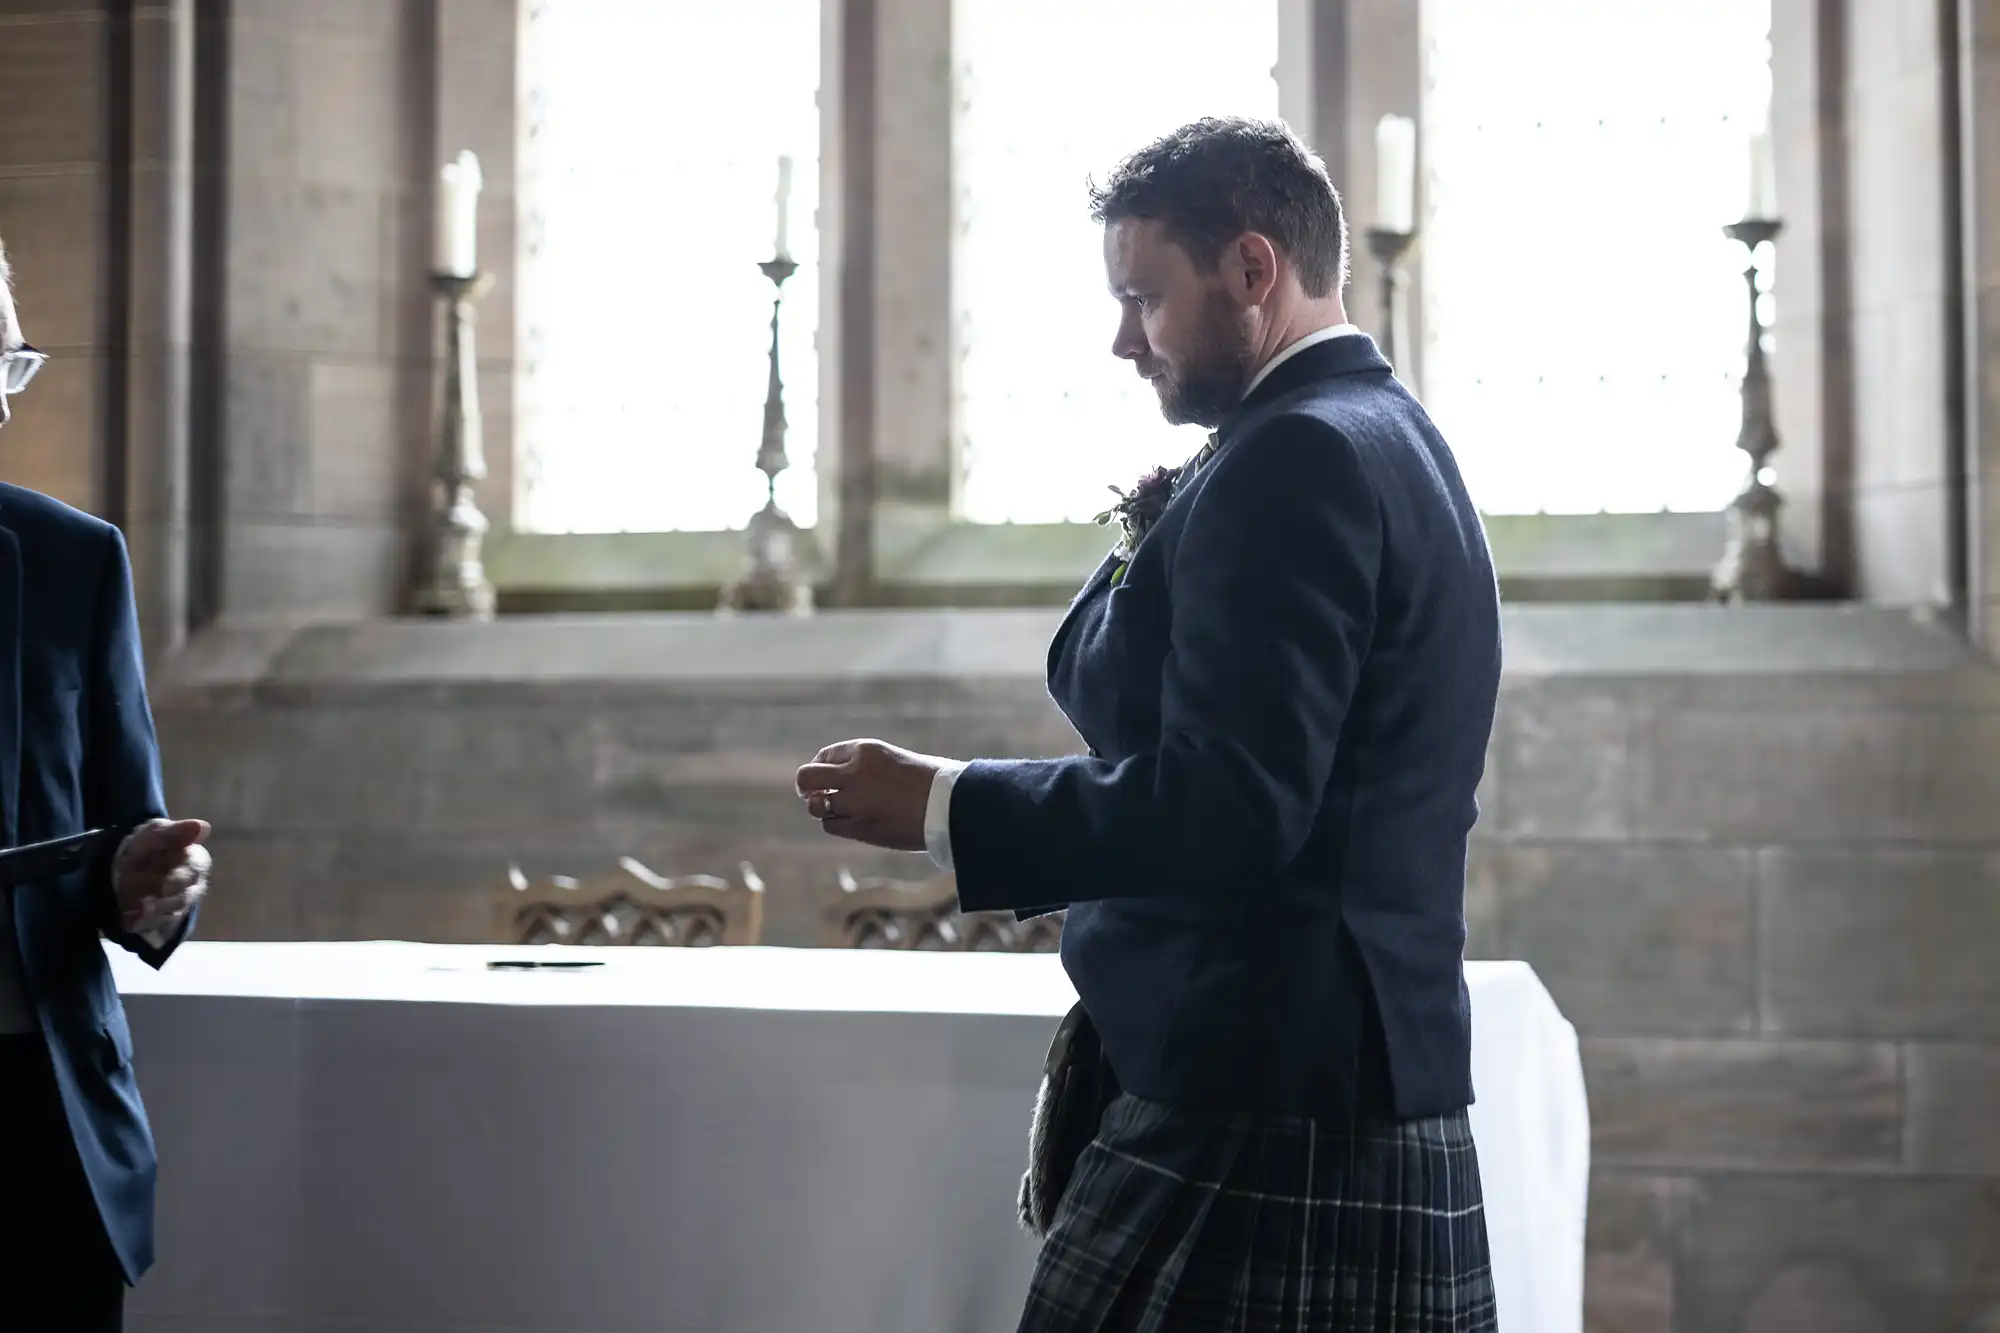 A man in a kilt and jacket stands solemnly in a church, appearing to be part of a ceremony.